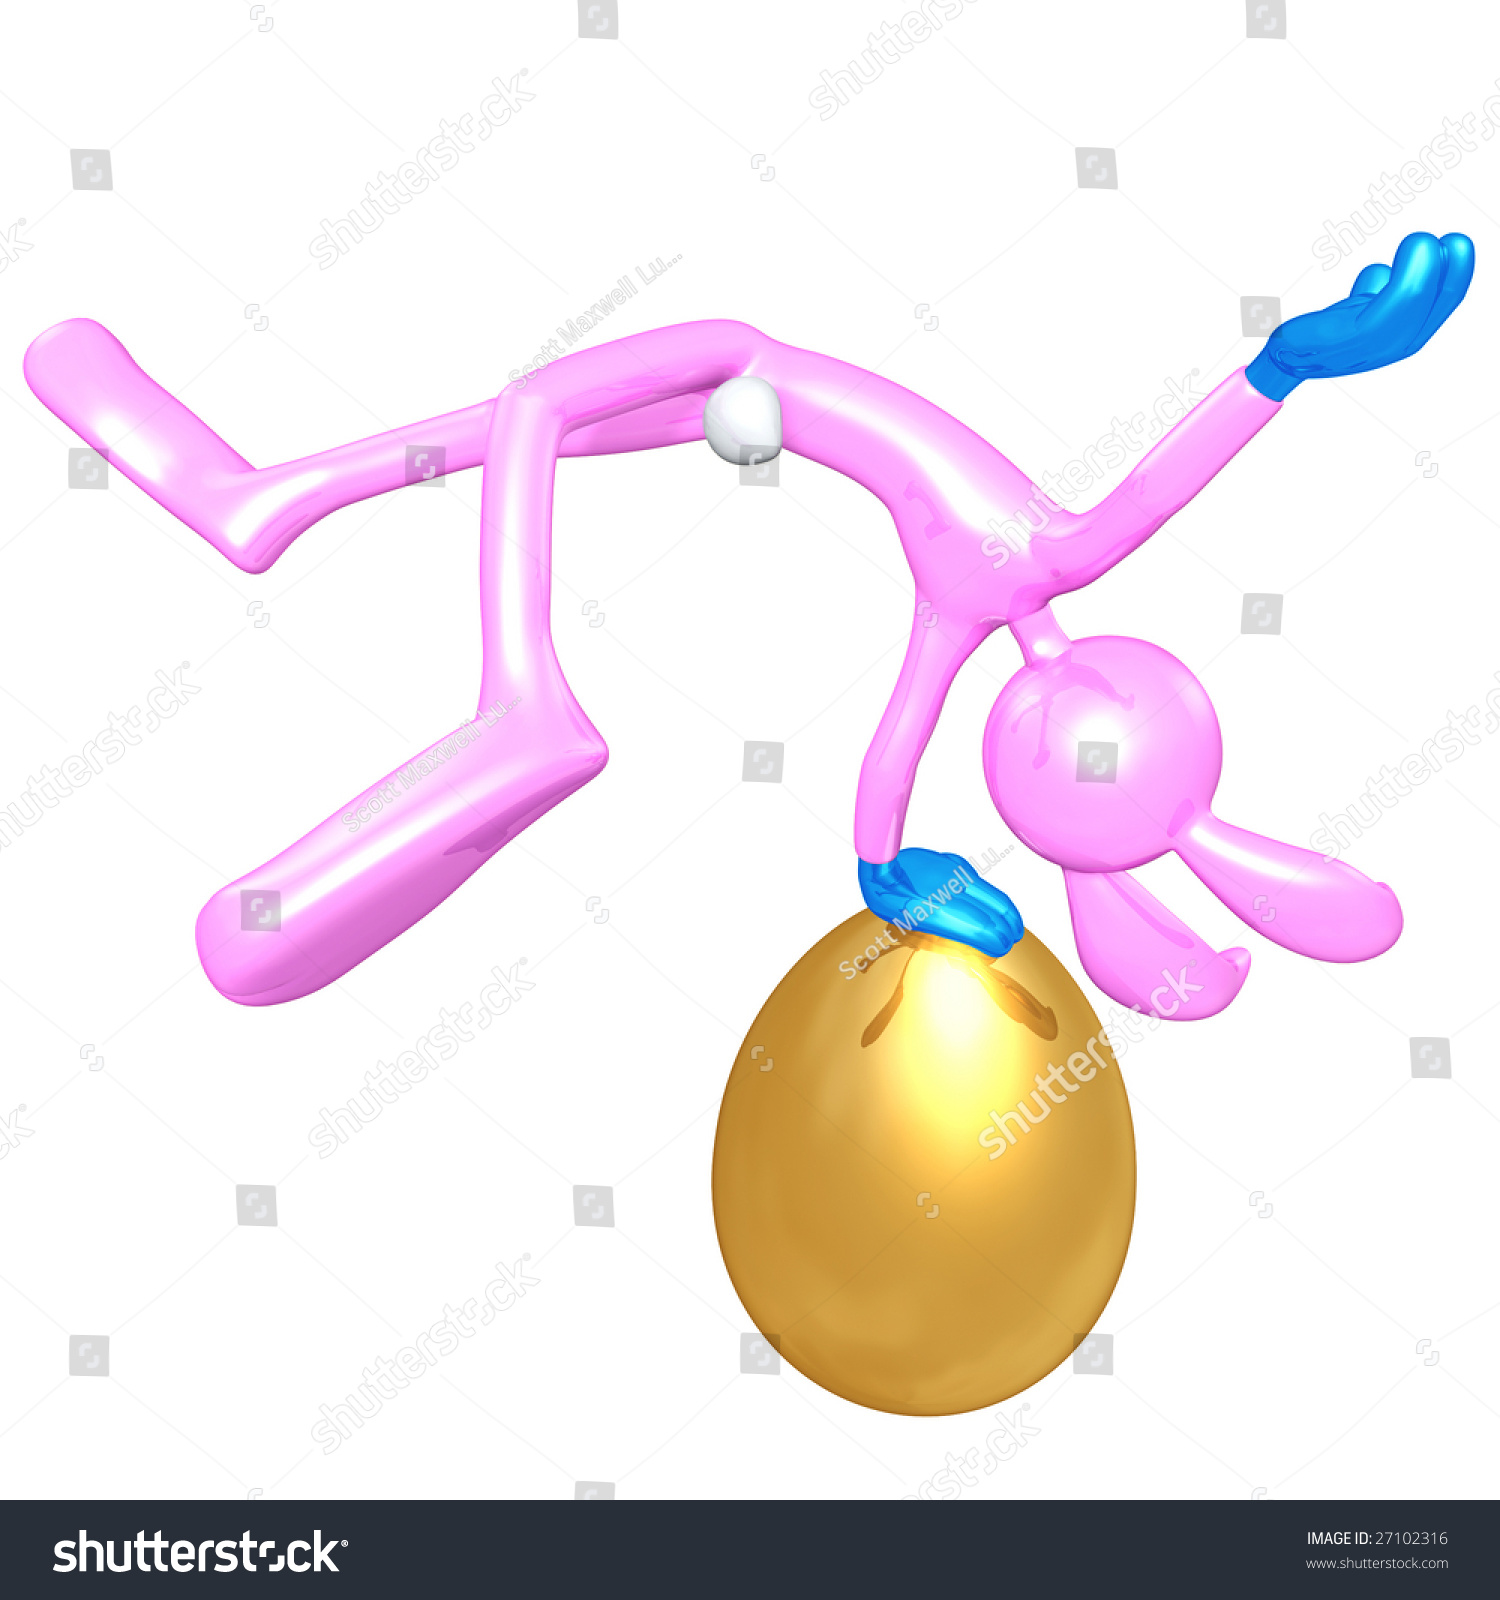 Easter Bunny With Golden Egg #27102316